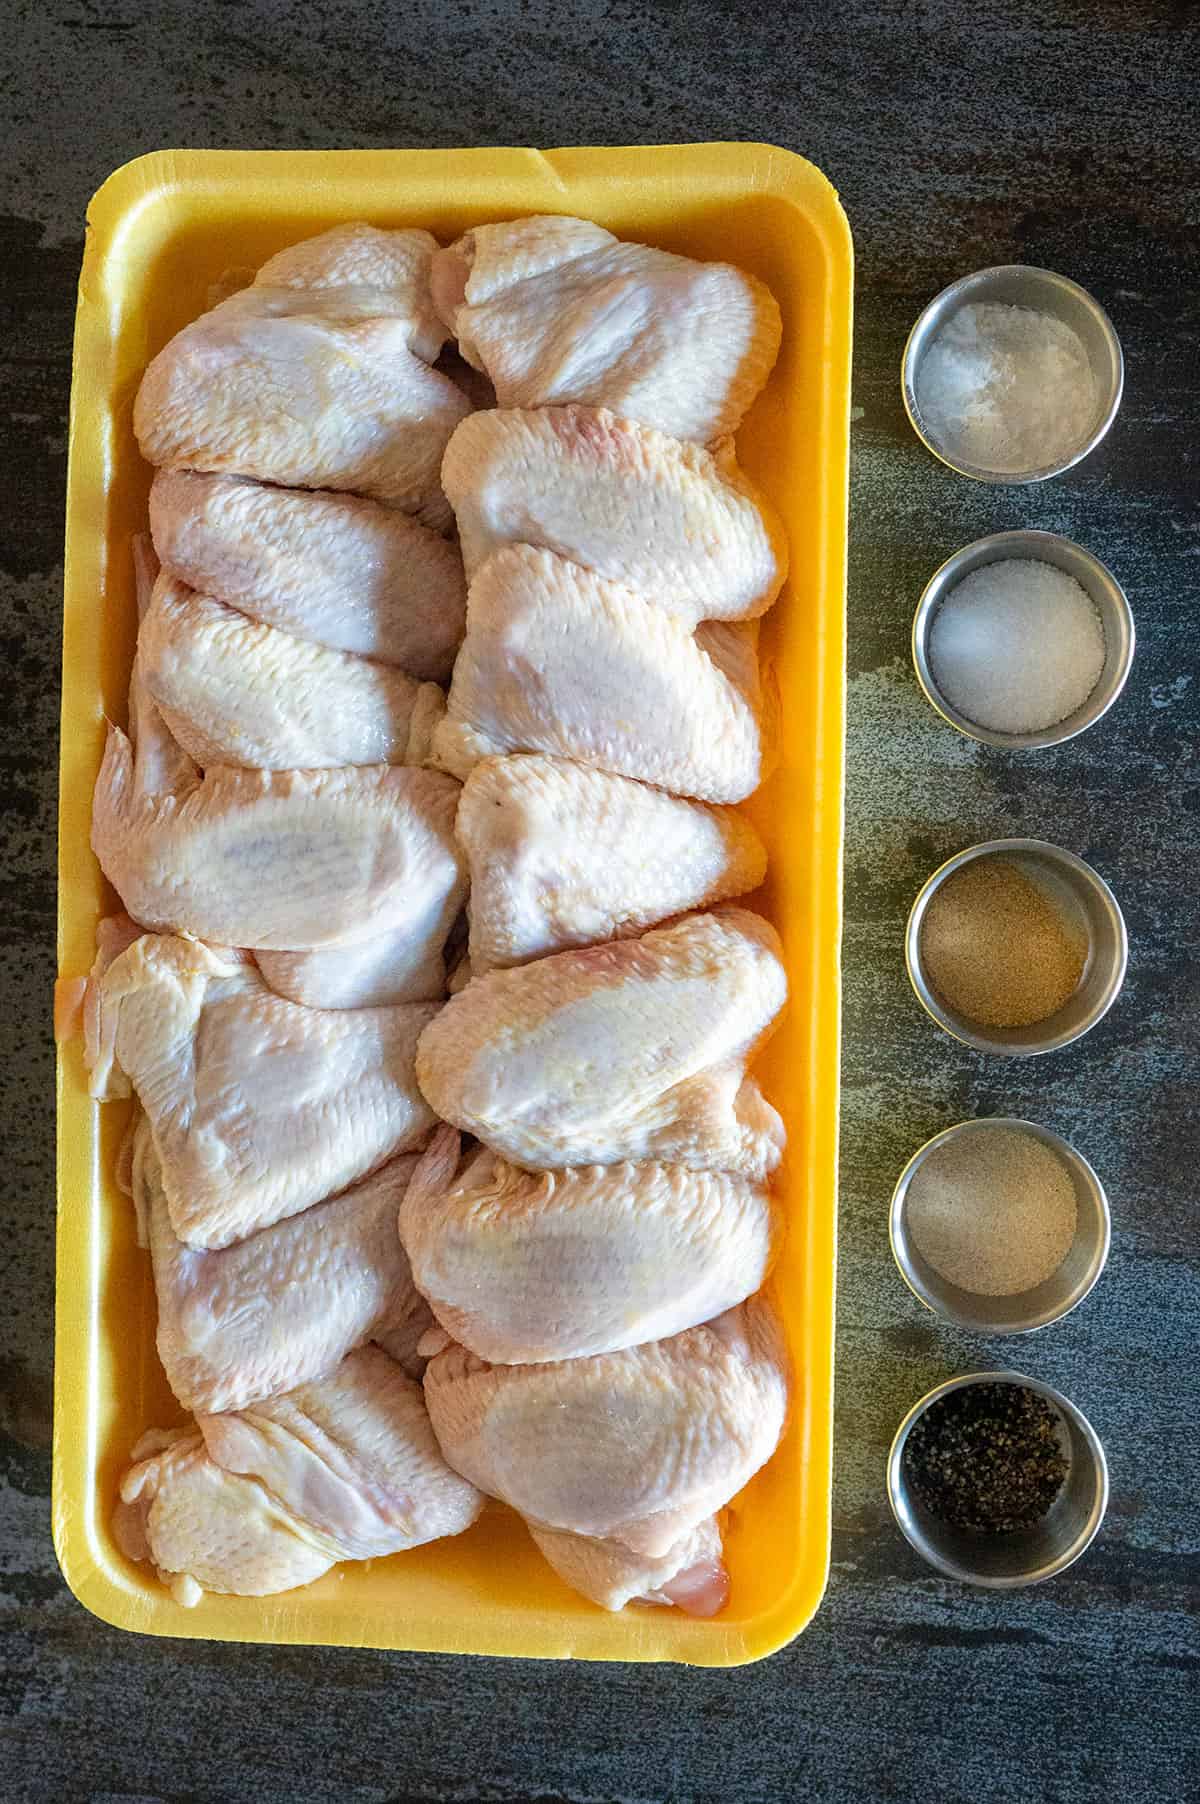 Ingredients for crispy chicken wings with baking powder.